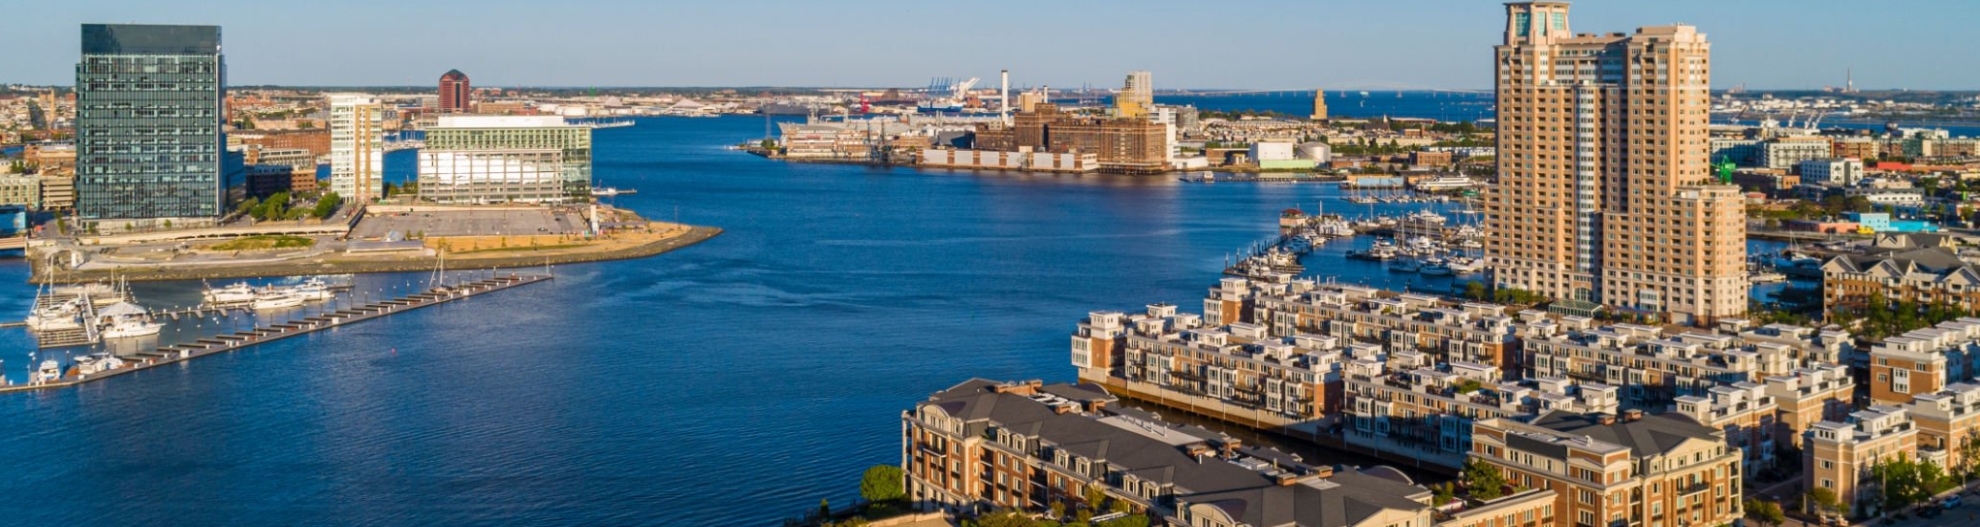 The aerial view on Harbor View residential district and marina at Patapsco River in Baltimore, Maryland, USA